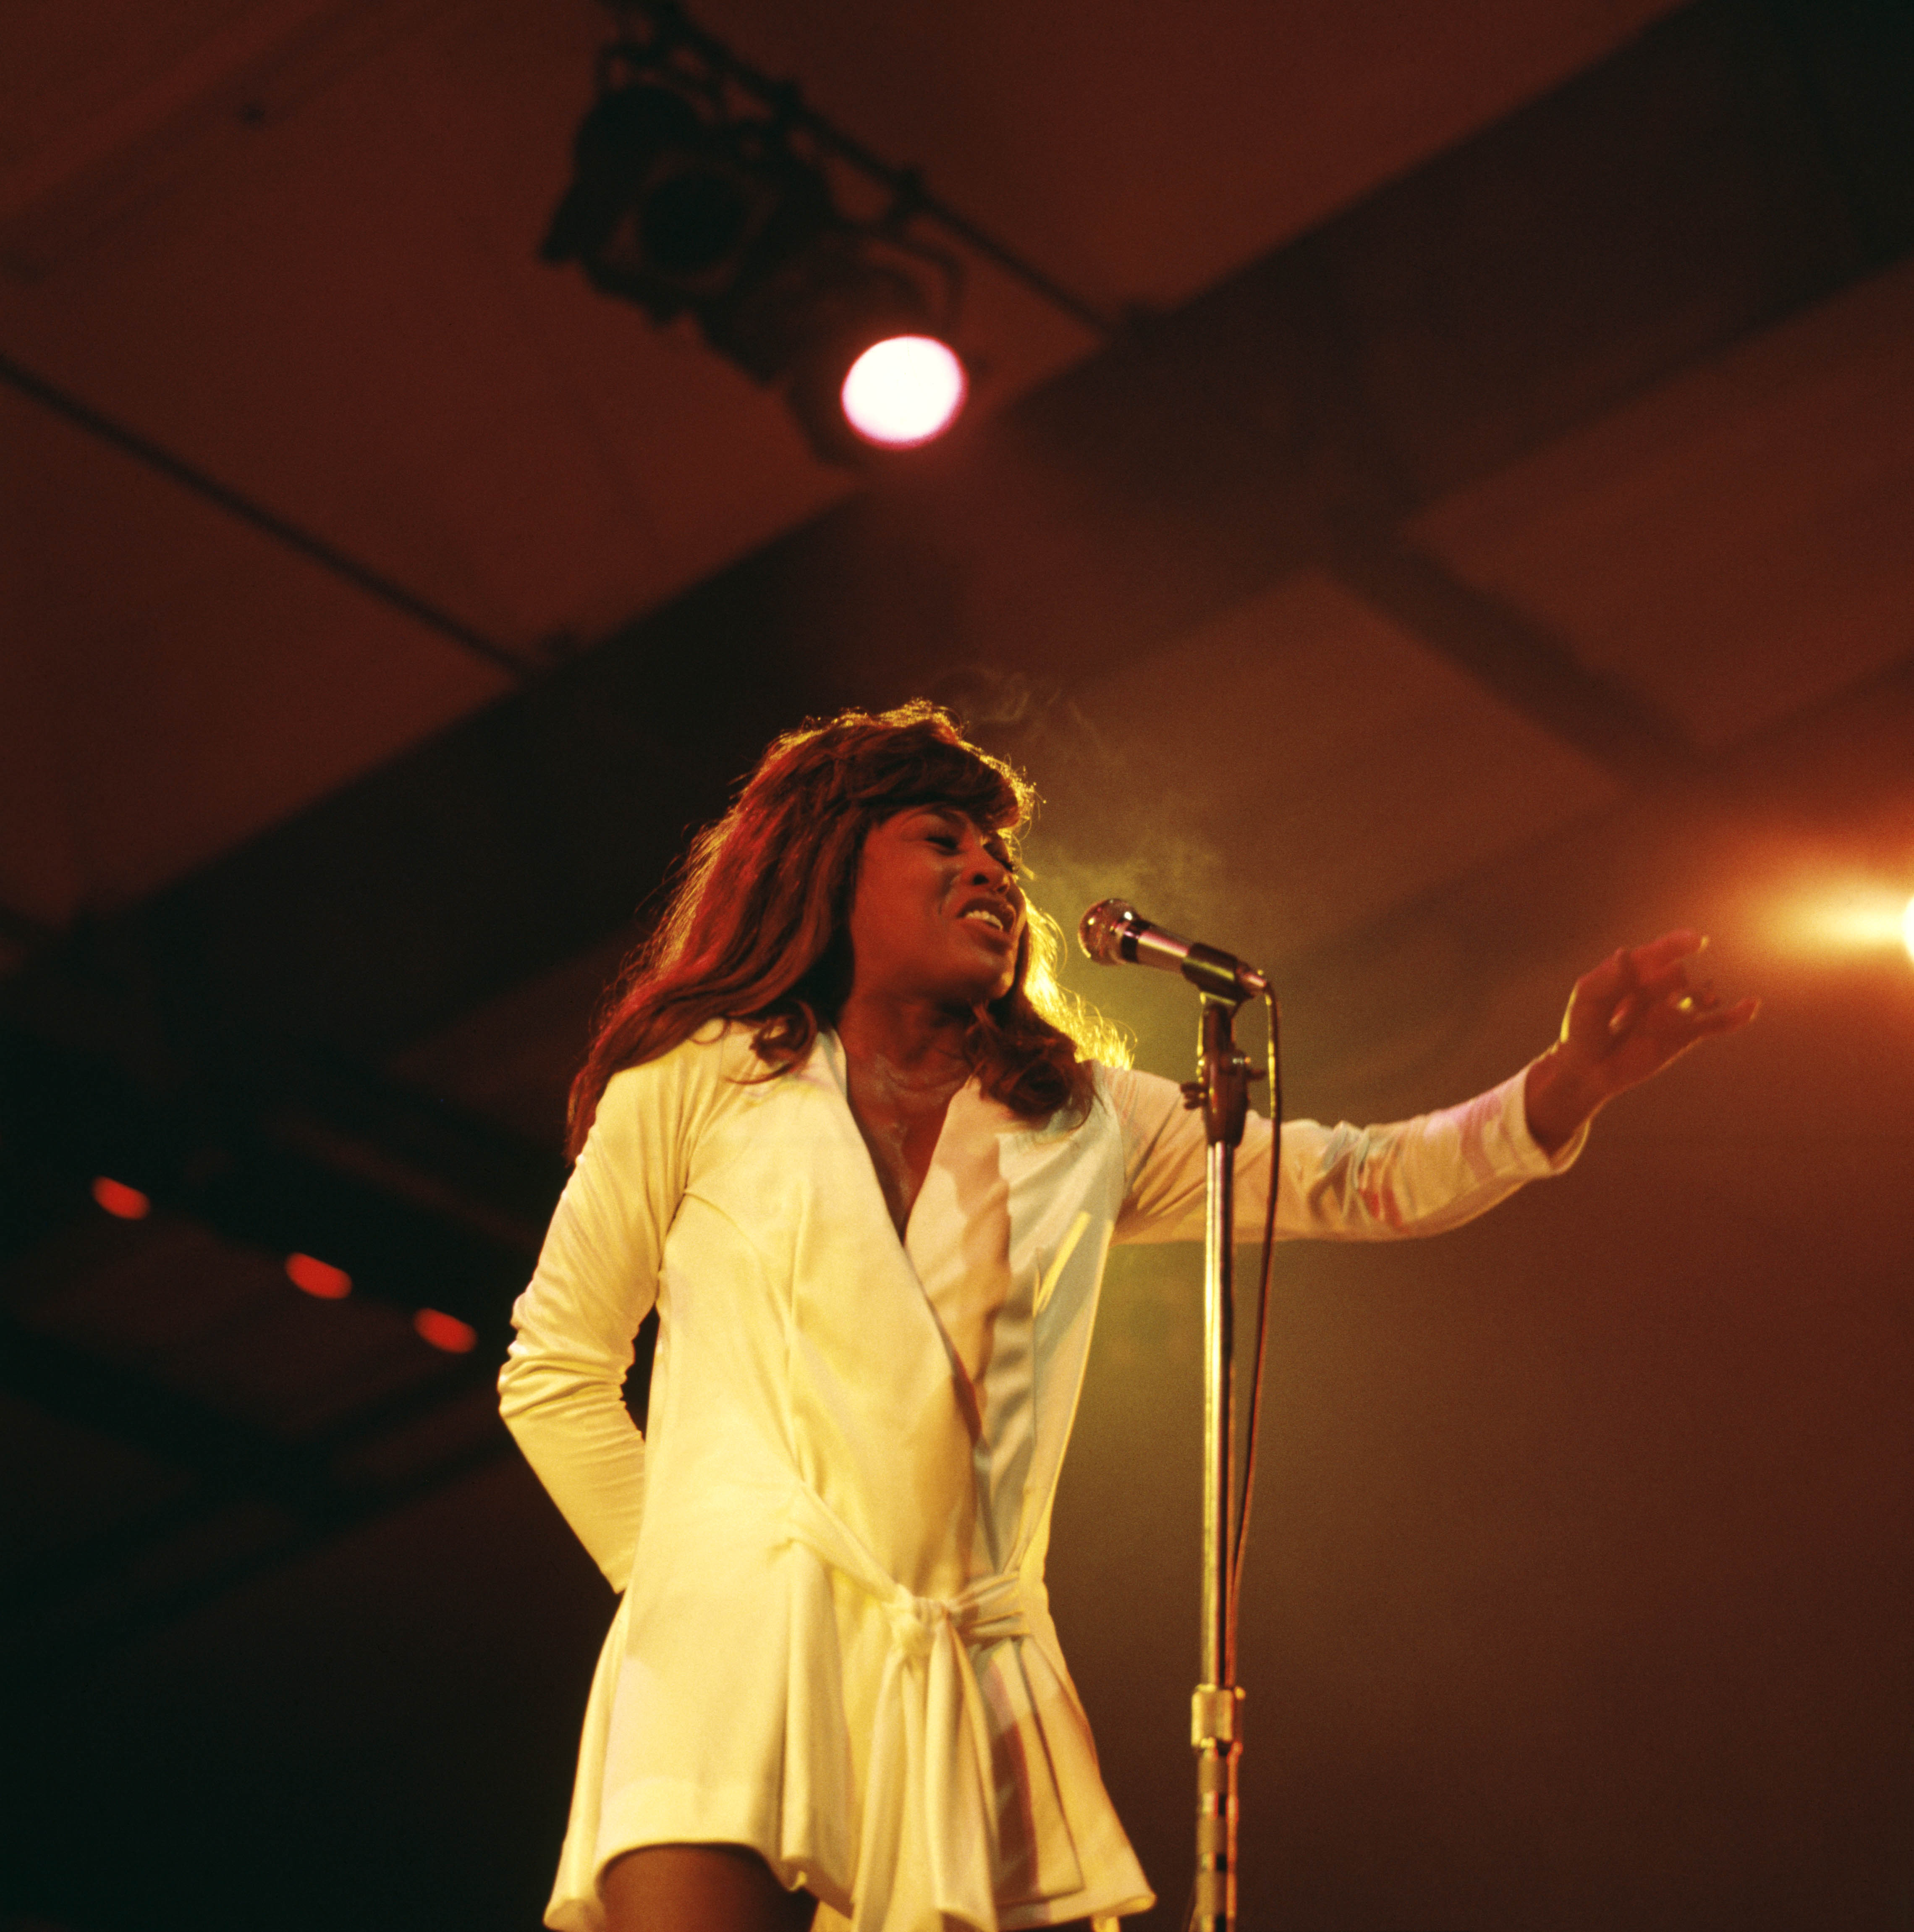 The singer performing on stage on July 11, 1970. | Source: Getty Images